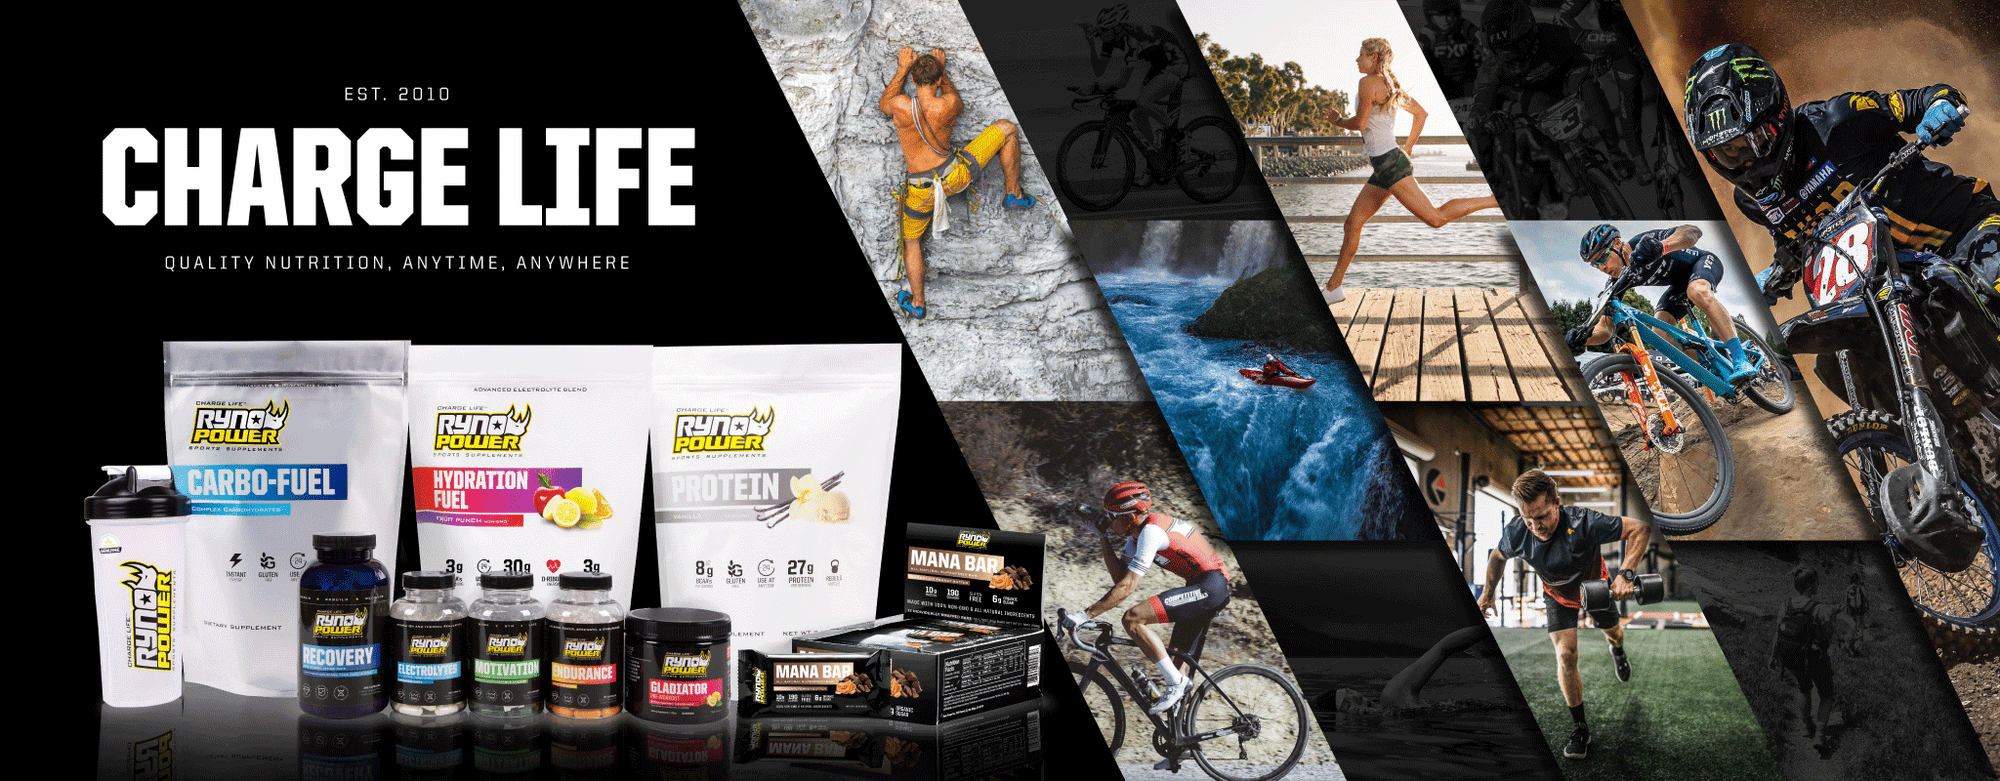 CHARGE LIFE BANNER WITH ATHLETE COLLAGE